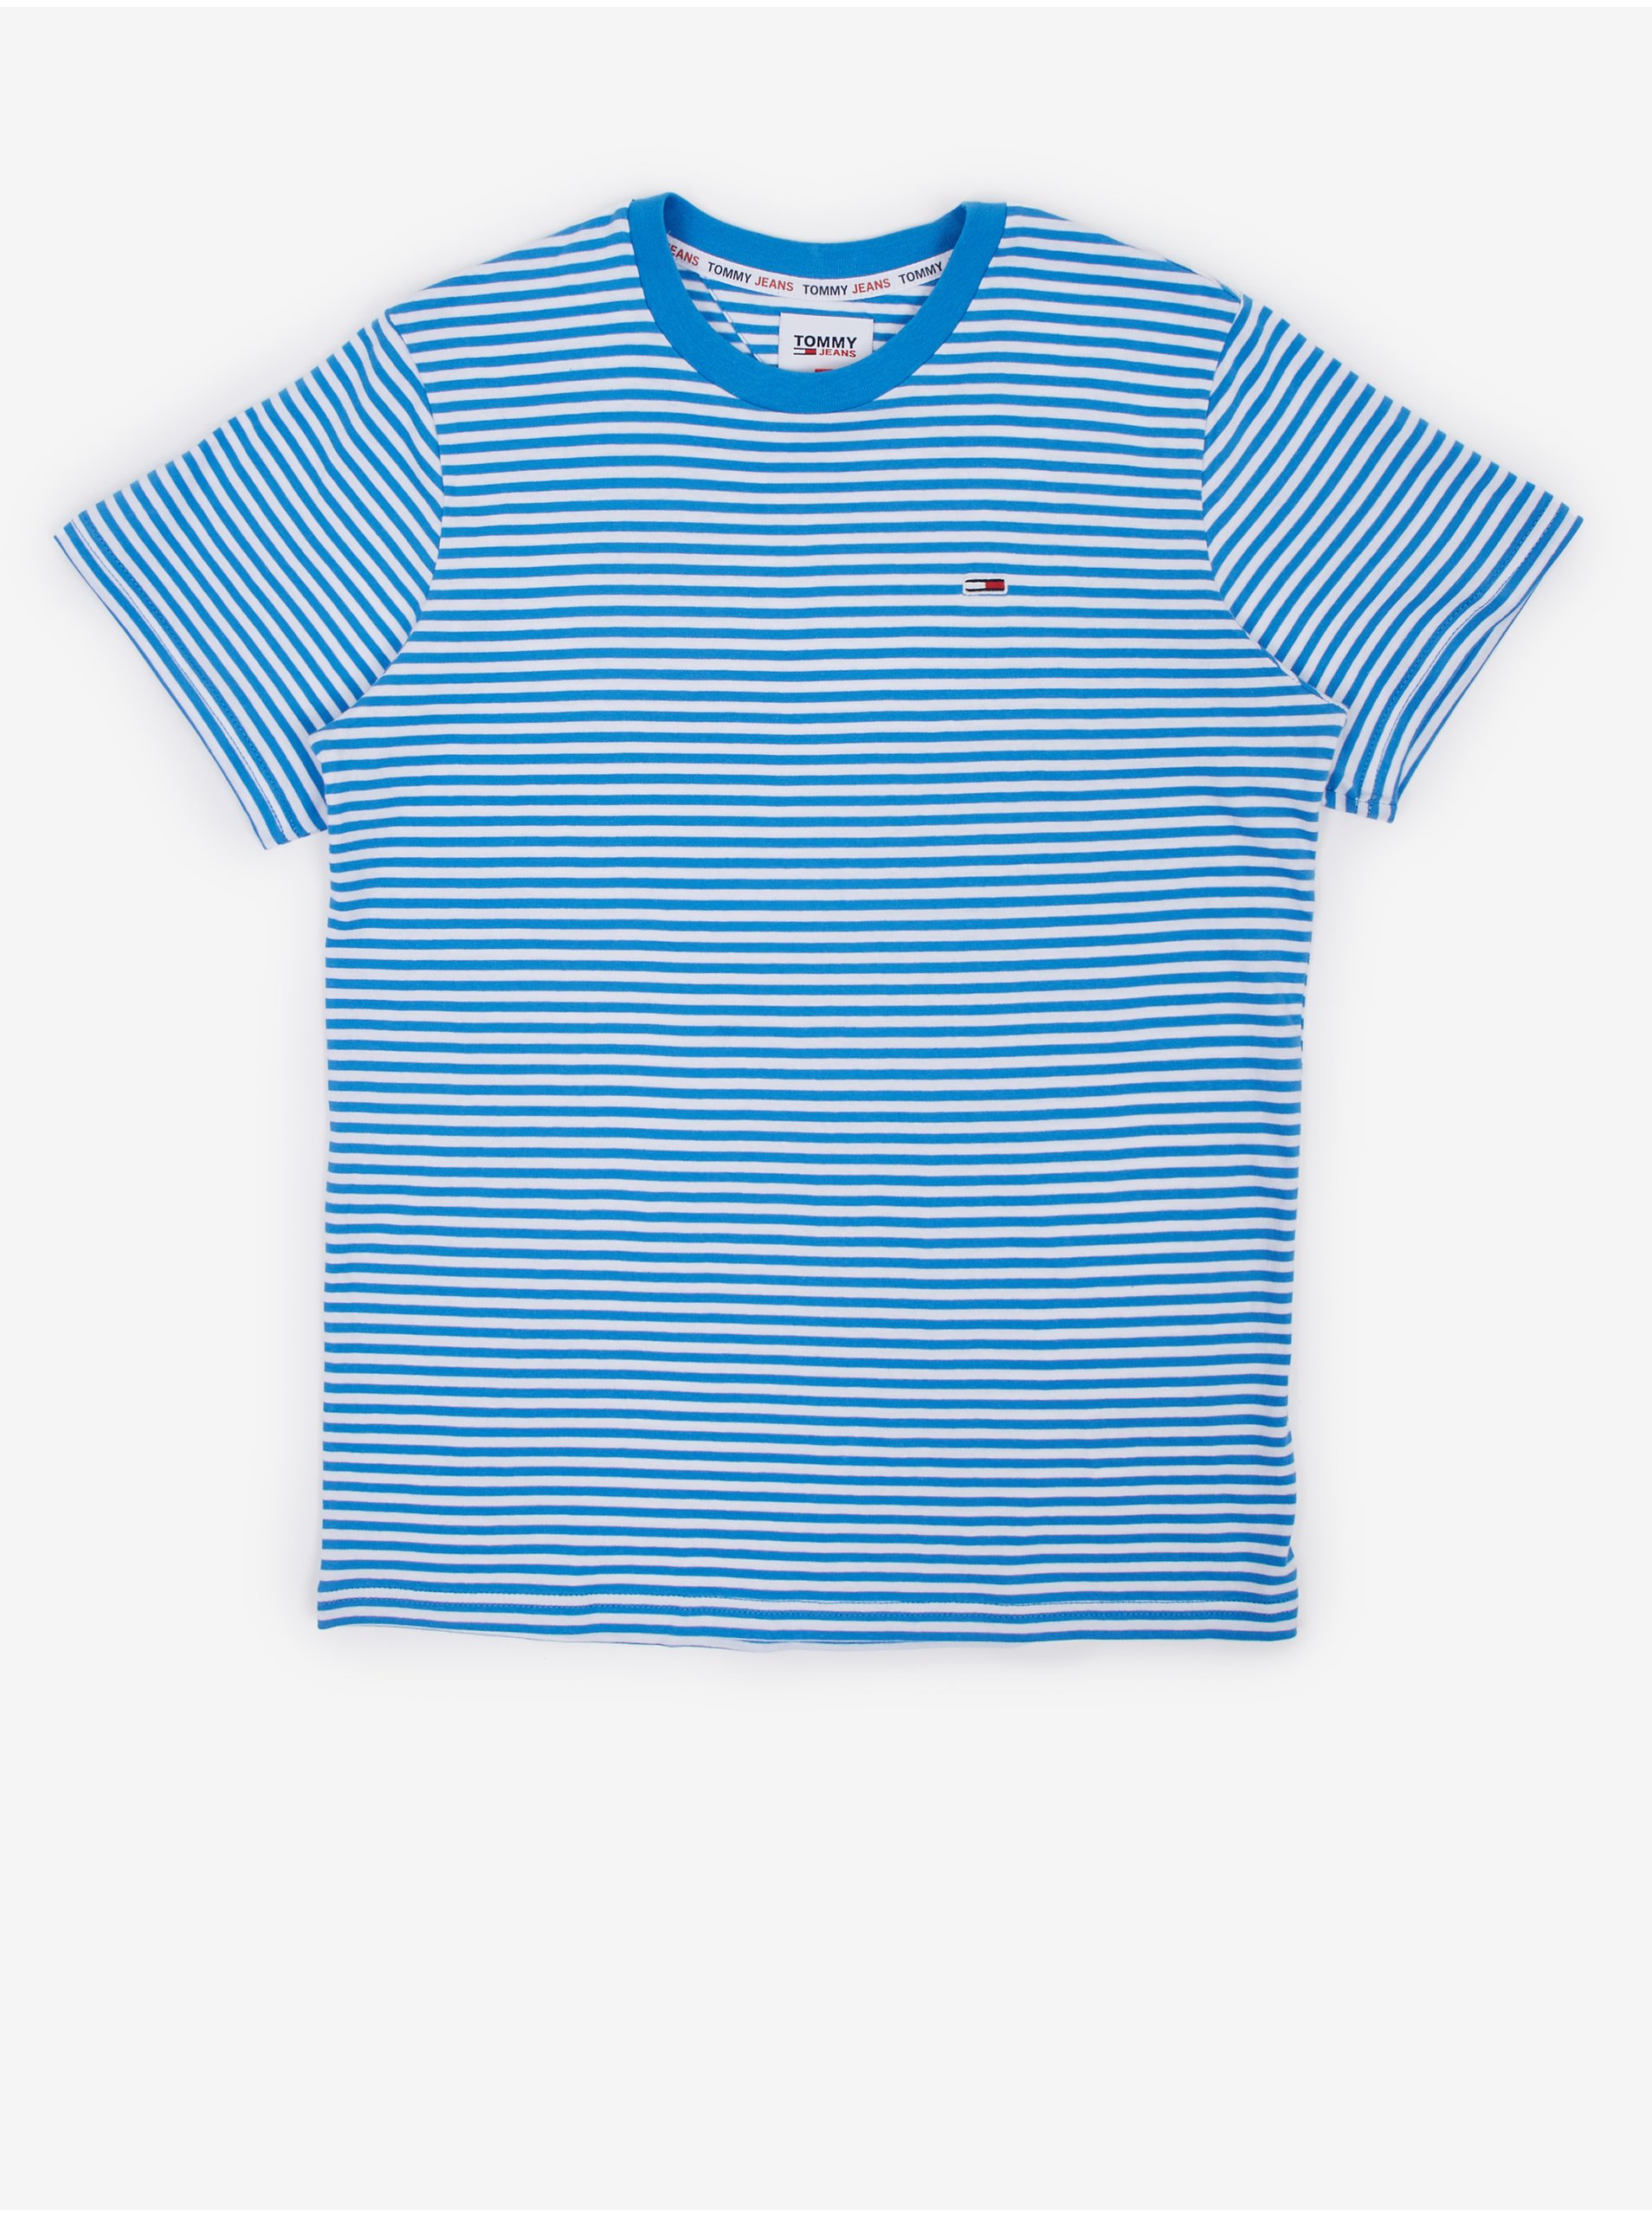 White and blue men's striped T-Shirt Tommy Jeans - Men